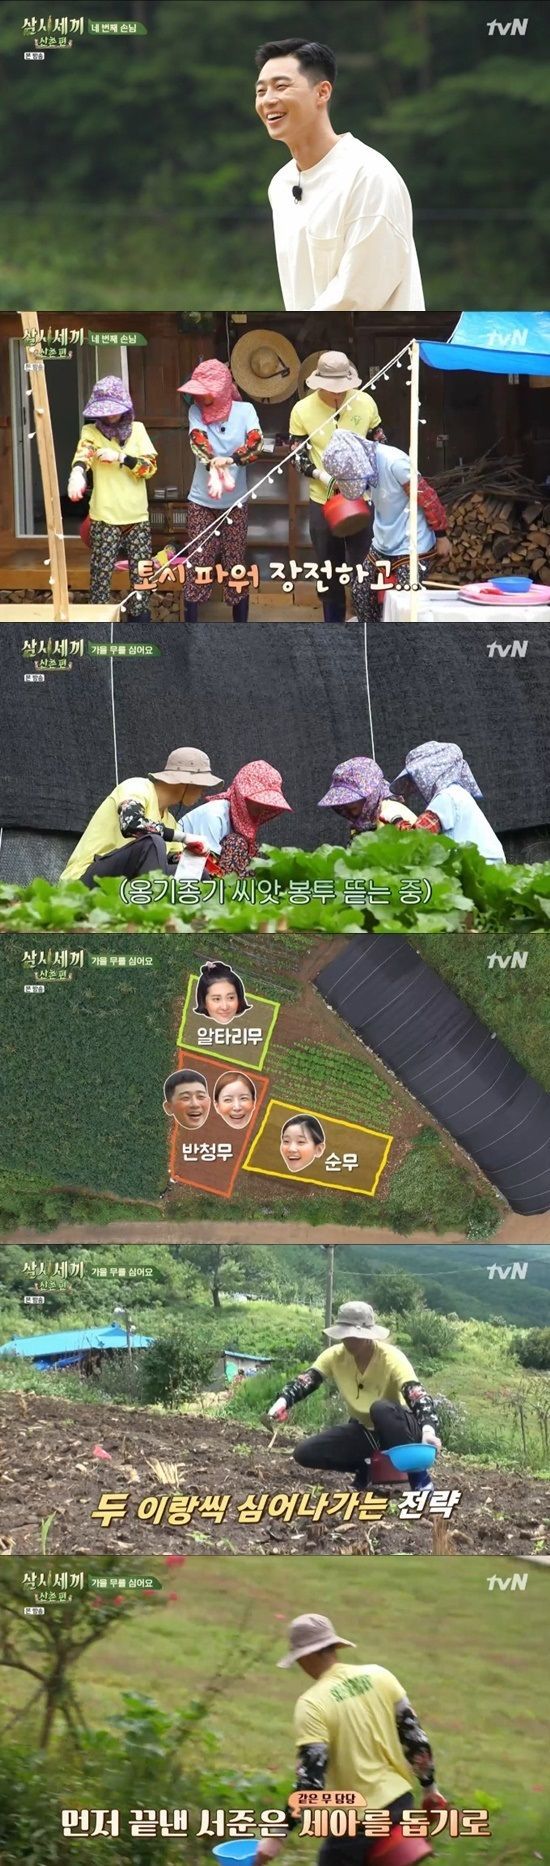 Actor Park Seo-joon, who appeared on TVN entertainment program Three Meals a Day Mountain Village, showed his ability to plant.On the 4th broadcast tvN Three Meals a Day mountain village, Park Seo-joon appeared as a guest and enjoyed living in a mountain village with the cast.On the show, Park Seo-joon arrived at the set, ate and returned to work clothes; after that, he began planting nothing, giving one person an hour.Park Seo-joon has started working with other cast members to share the section.He planted radish and expressed curiosity such as I know when I grow up and I want to check when I grow up.Also, Park Seo-joon surprised the cast by showing two furrows working at once, using long arms.Park Seo-joon also helped other cast members after completing his quota.